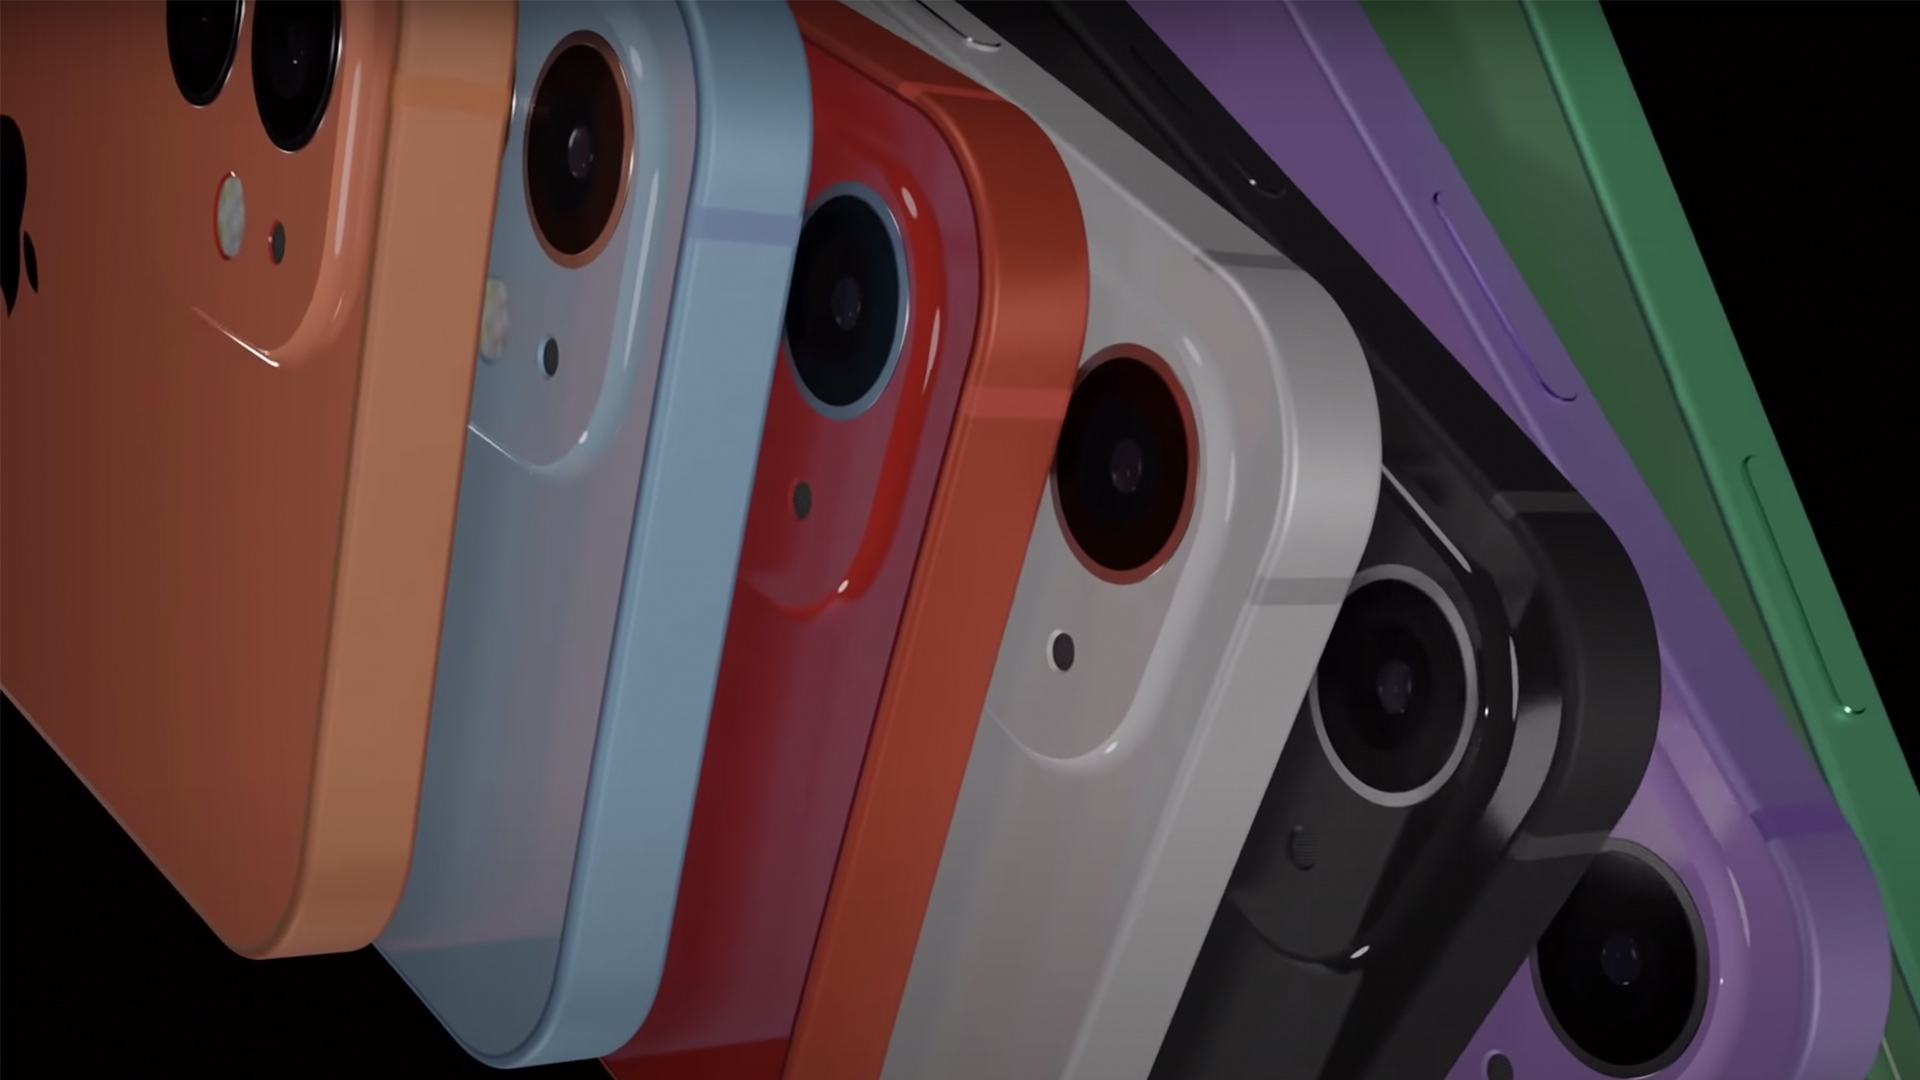 Iphone 12 Colours Revealed In New Concept Video And There S A